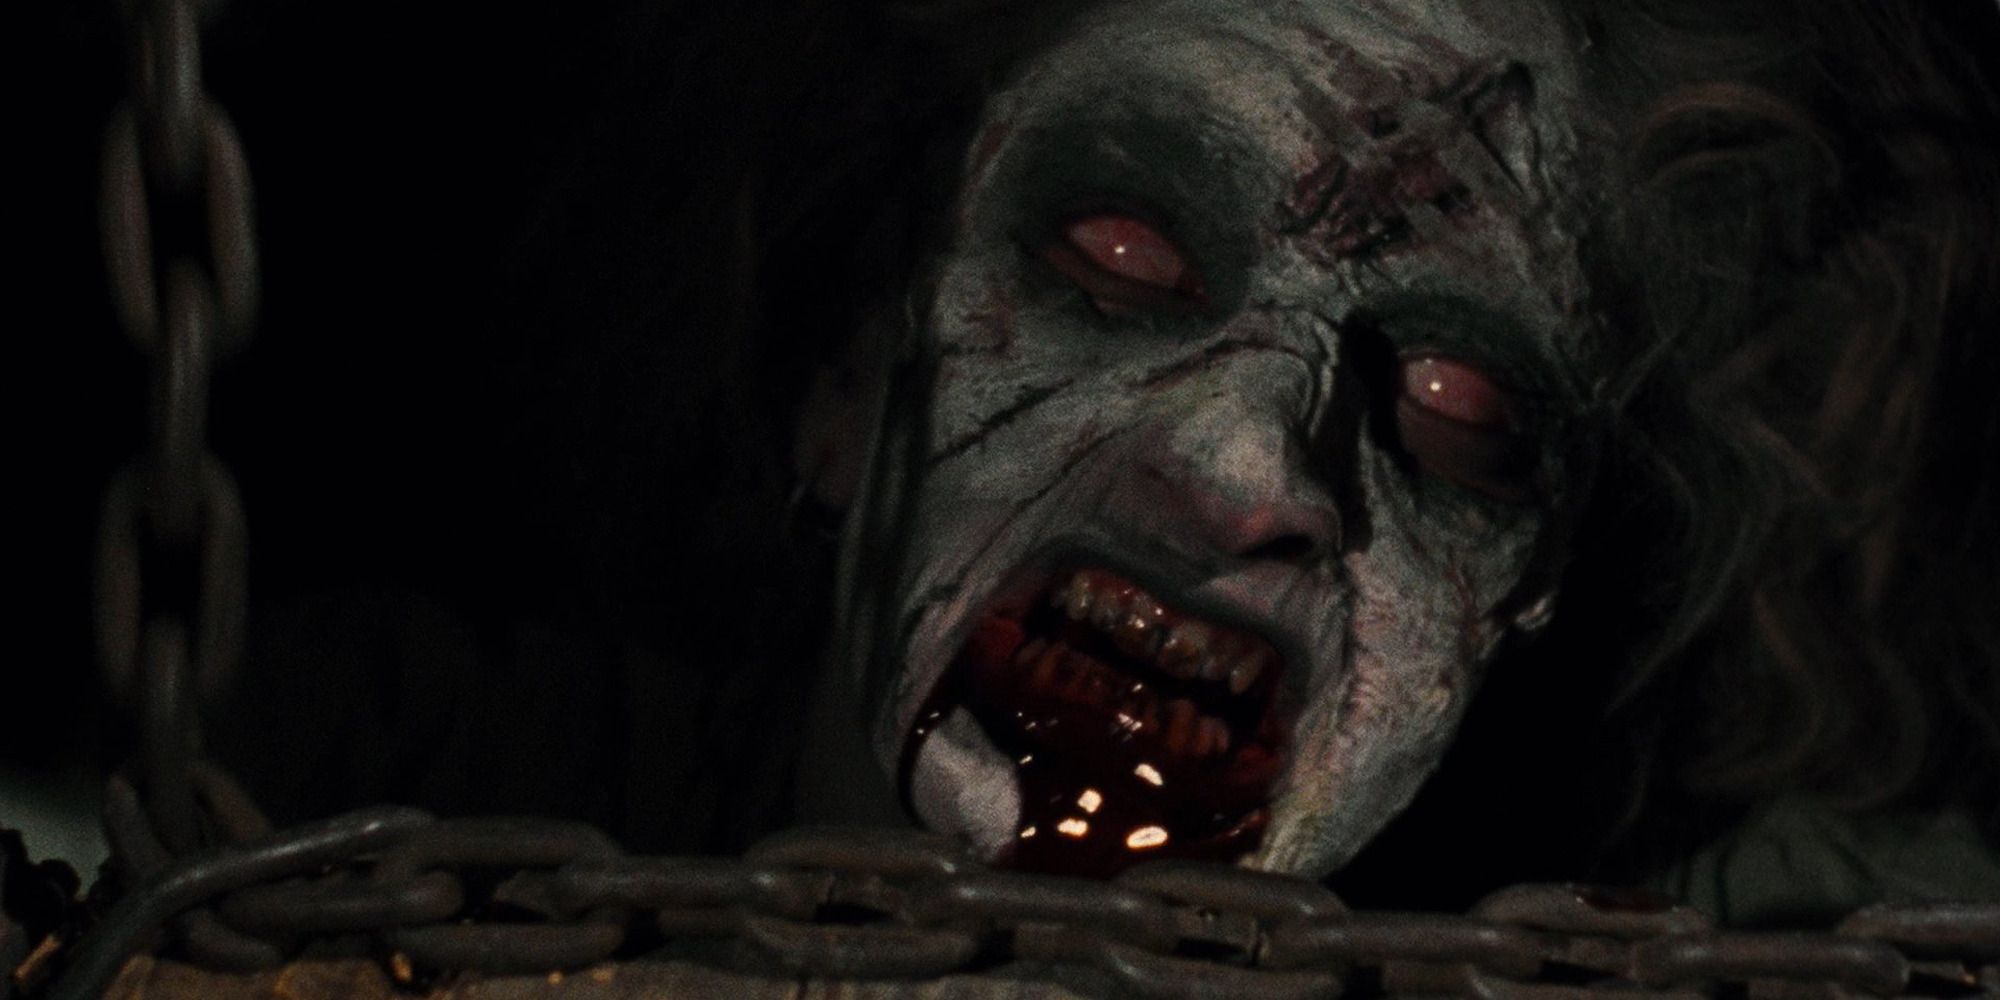 Dead man in The Evil Dead with blood in his mouth peeking from the floor